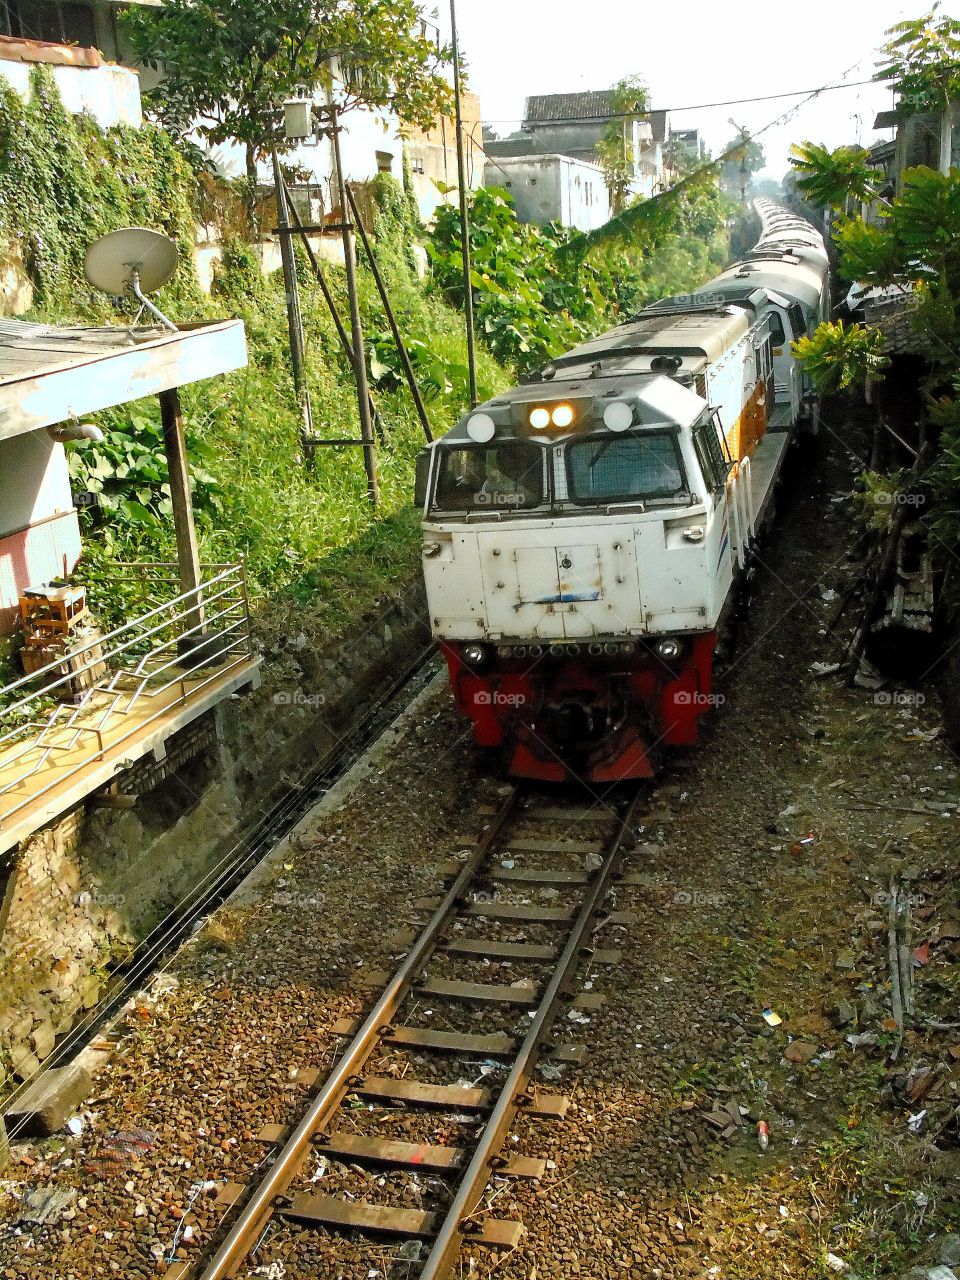 Bima Train, which has a route from Gambir Railway Station in Jakarta to Malang Railway Station, prepares to entering Malang Railway Station passes a curve with GE CM20EMP (CC 206).